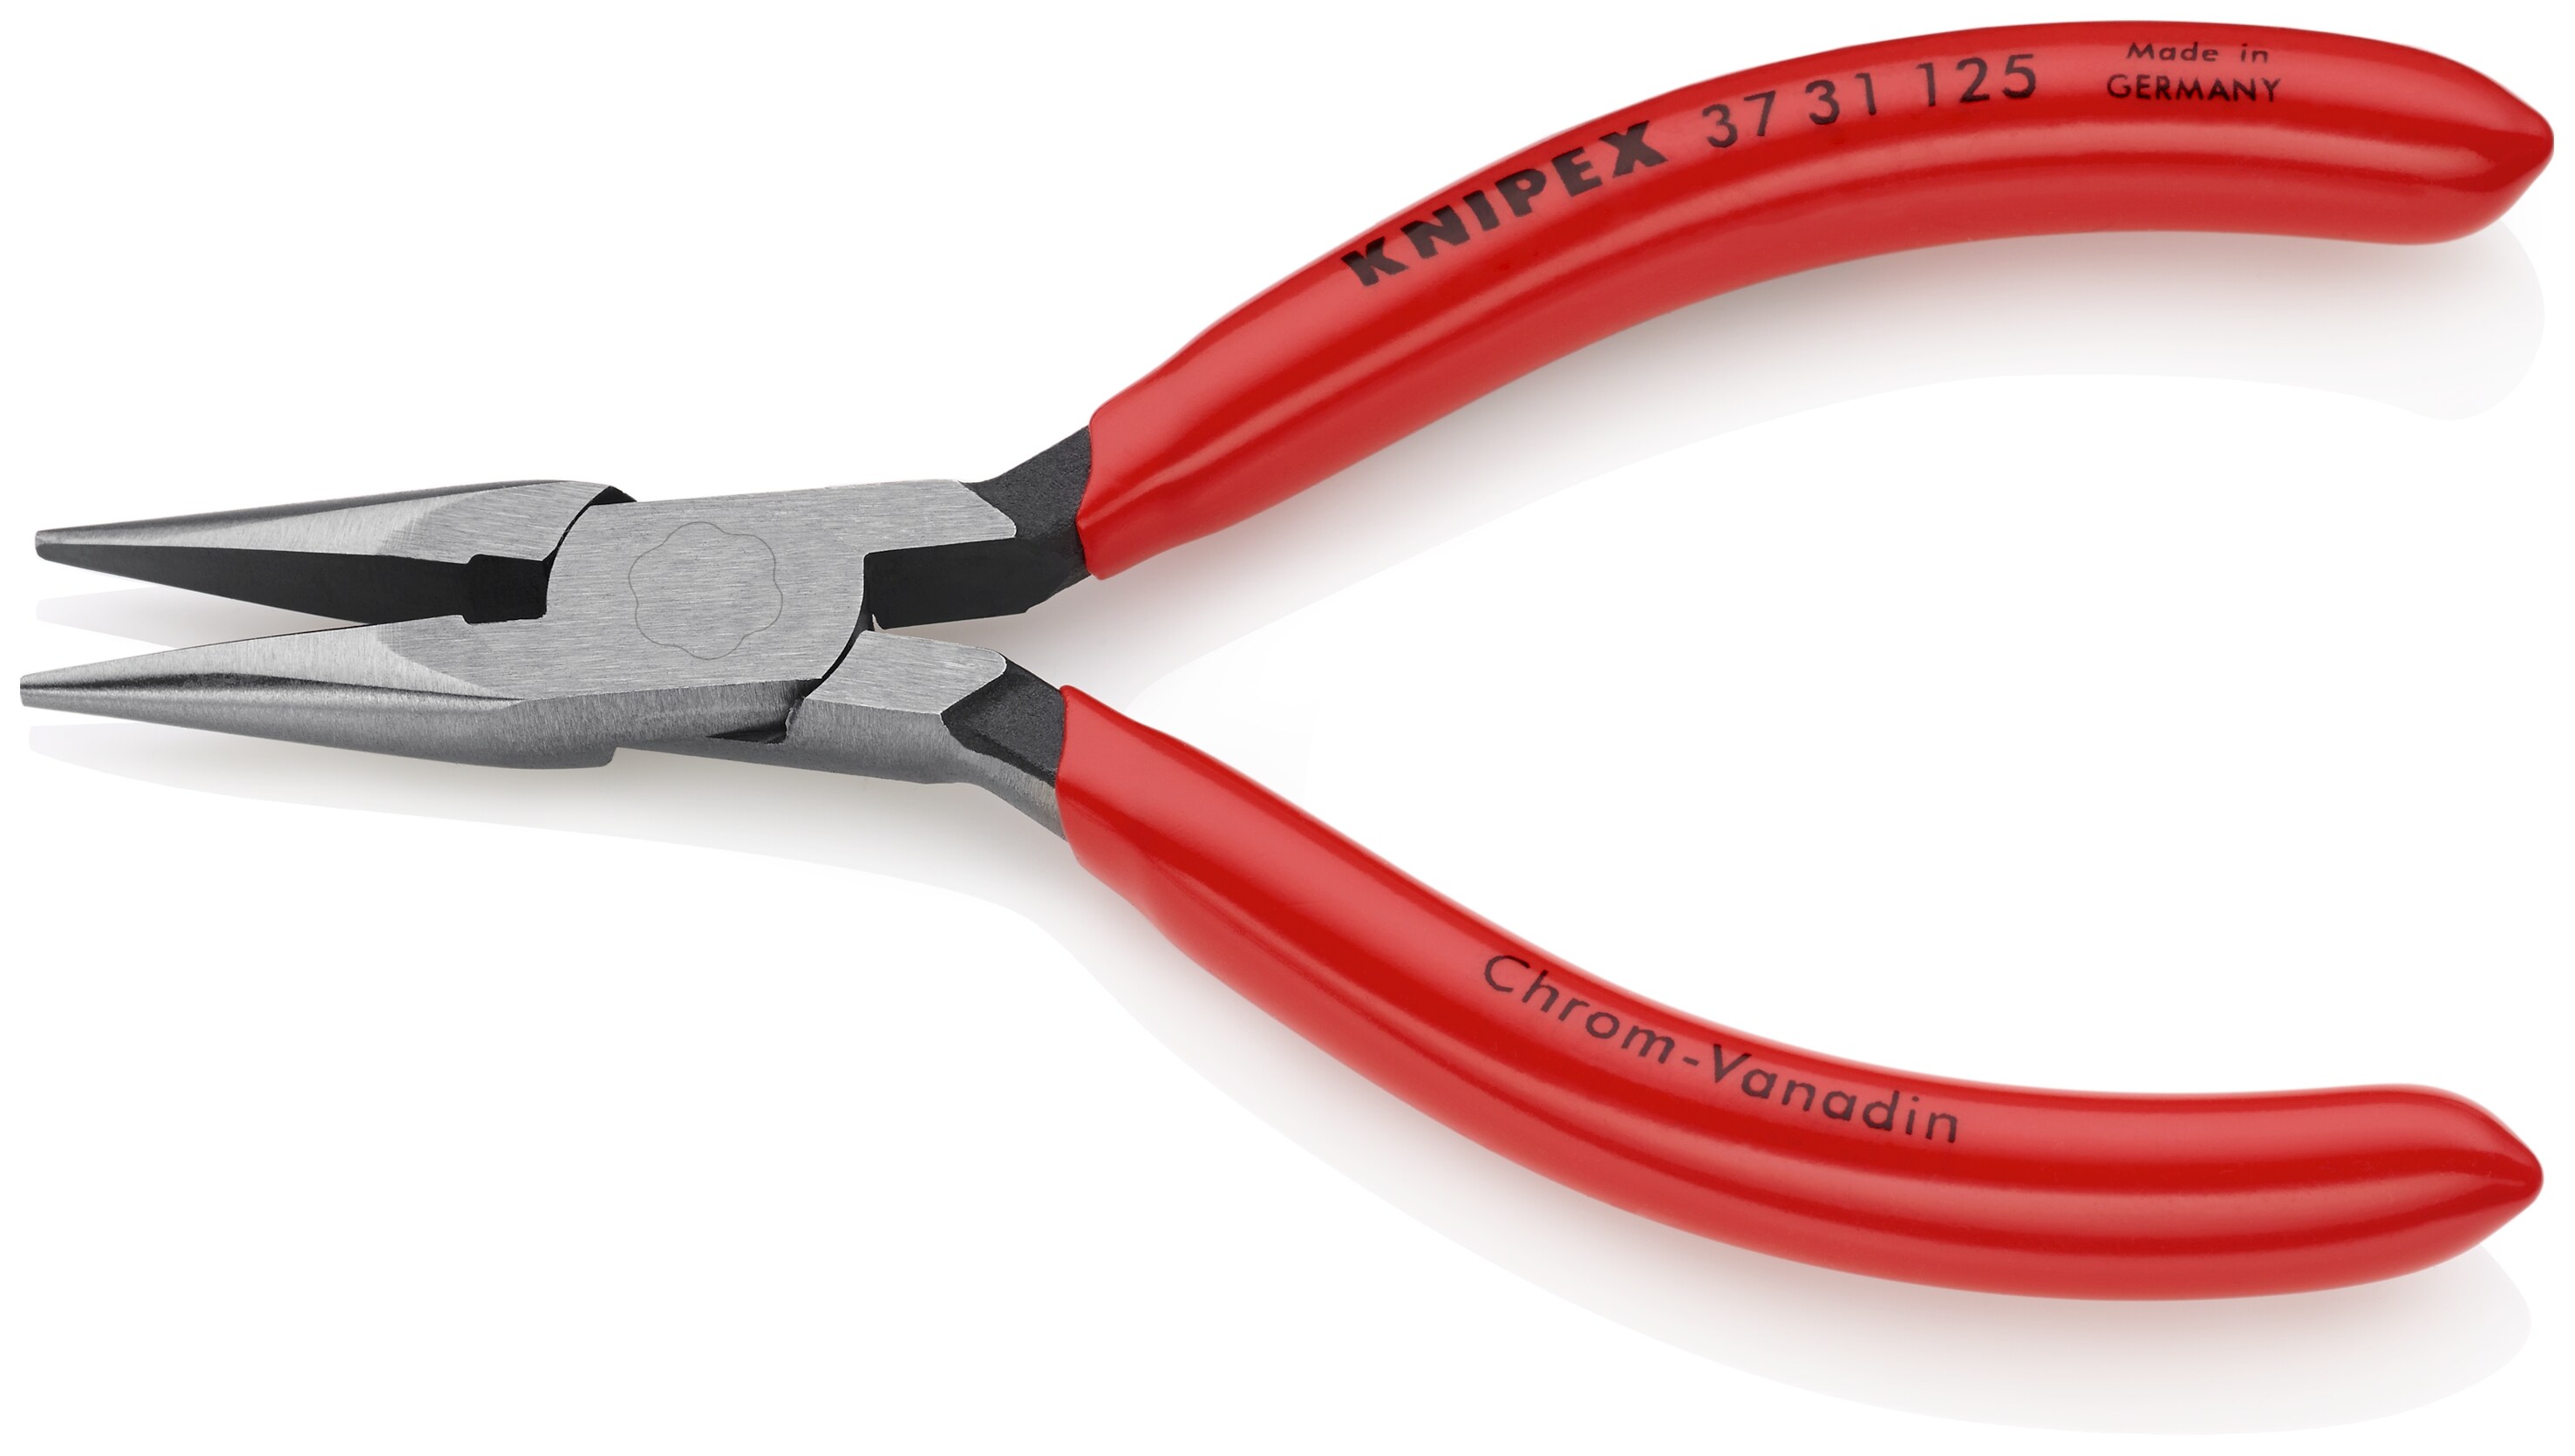 KNIPEX 5-in Needle Nose Pliers with Dipped Handle for Precision